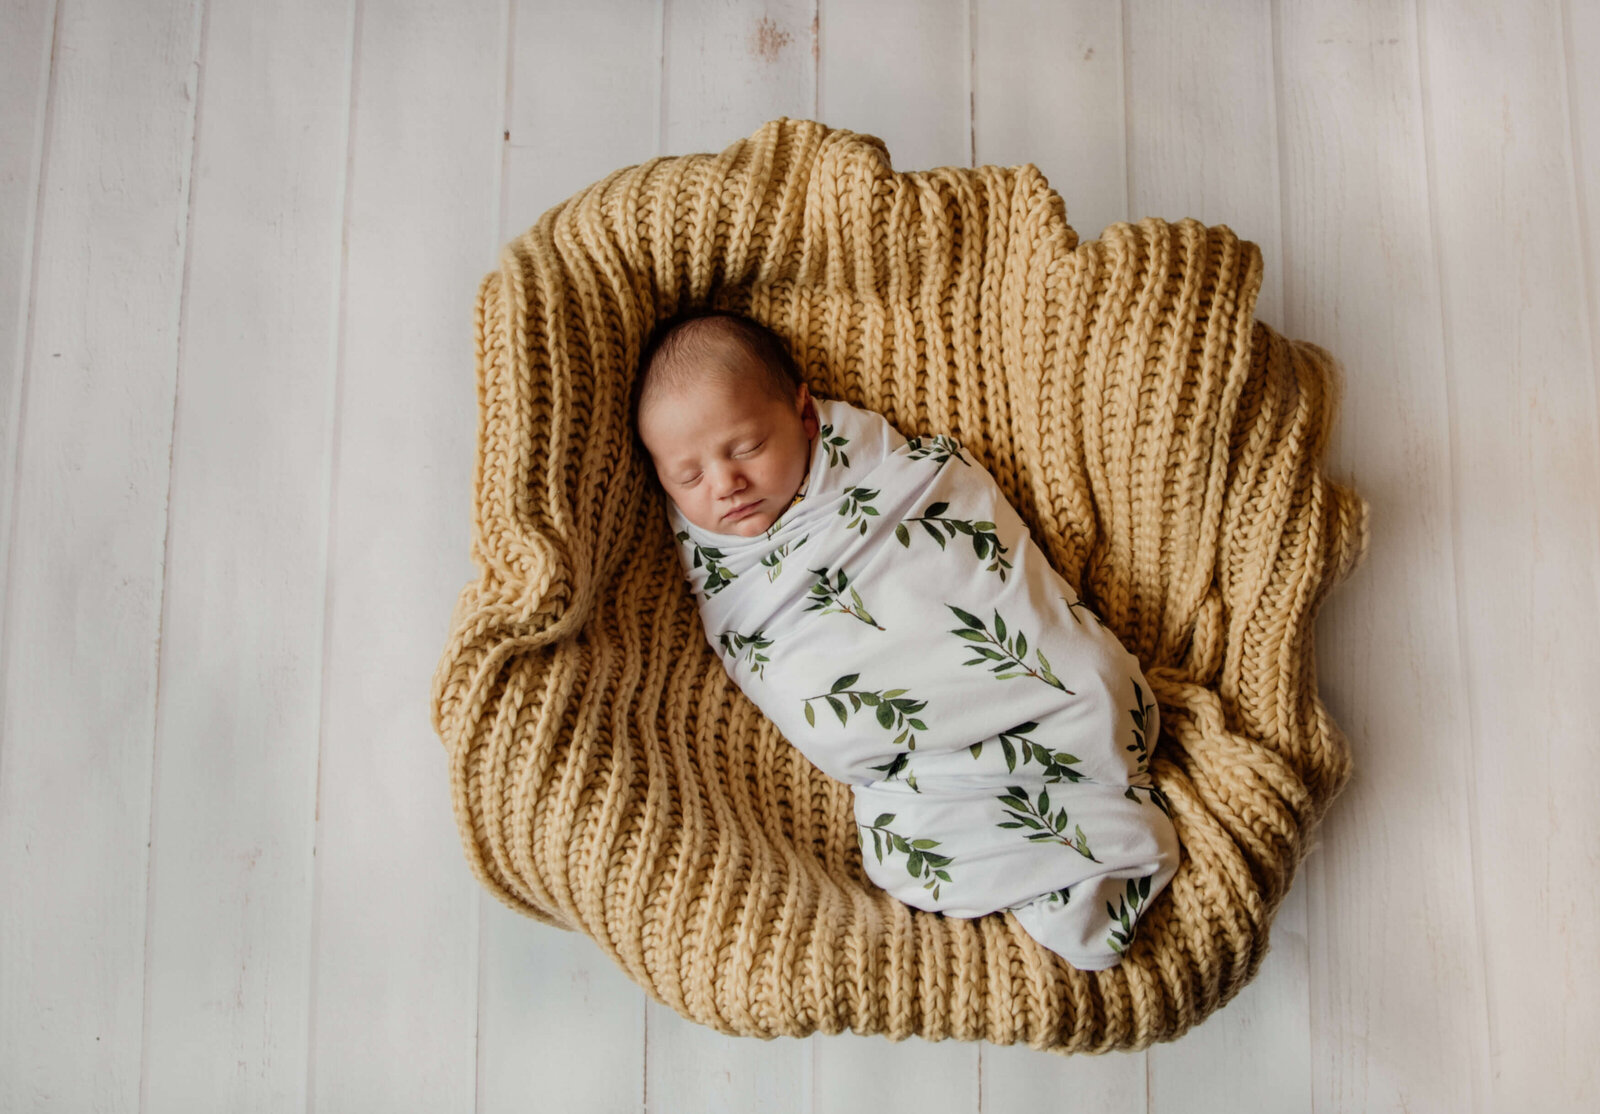 Baby in a basket on white wood floor.